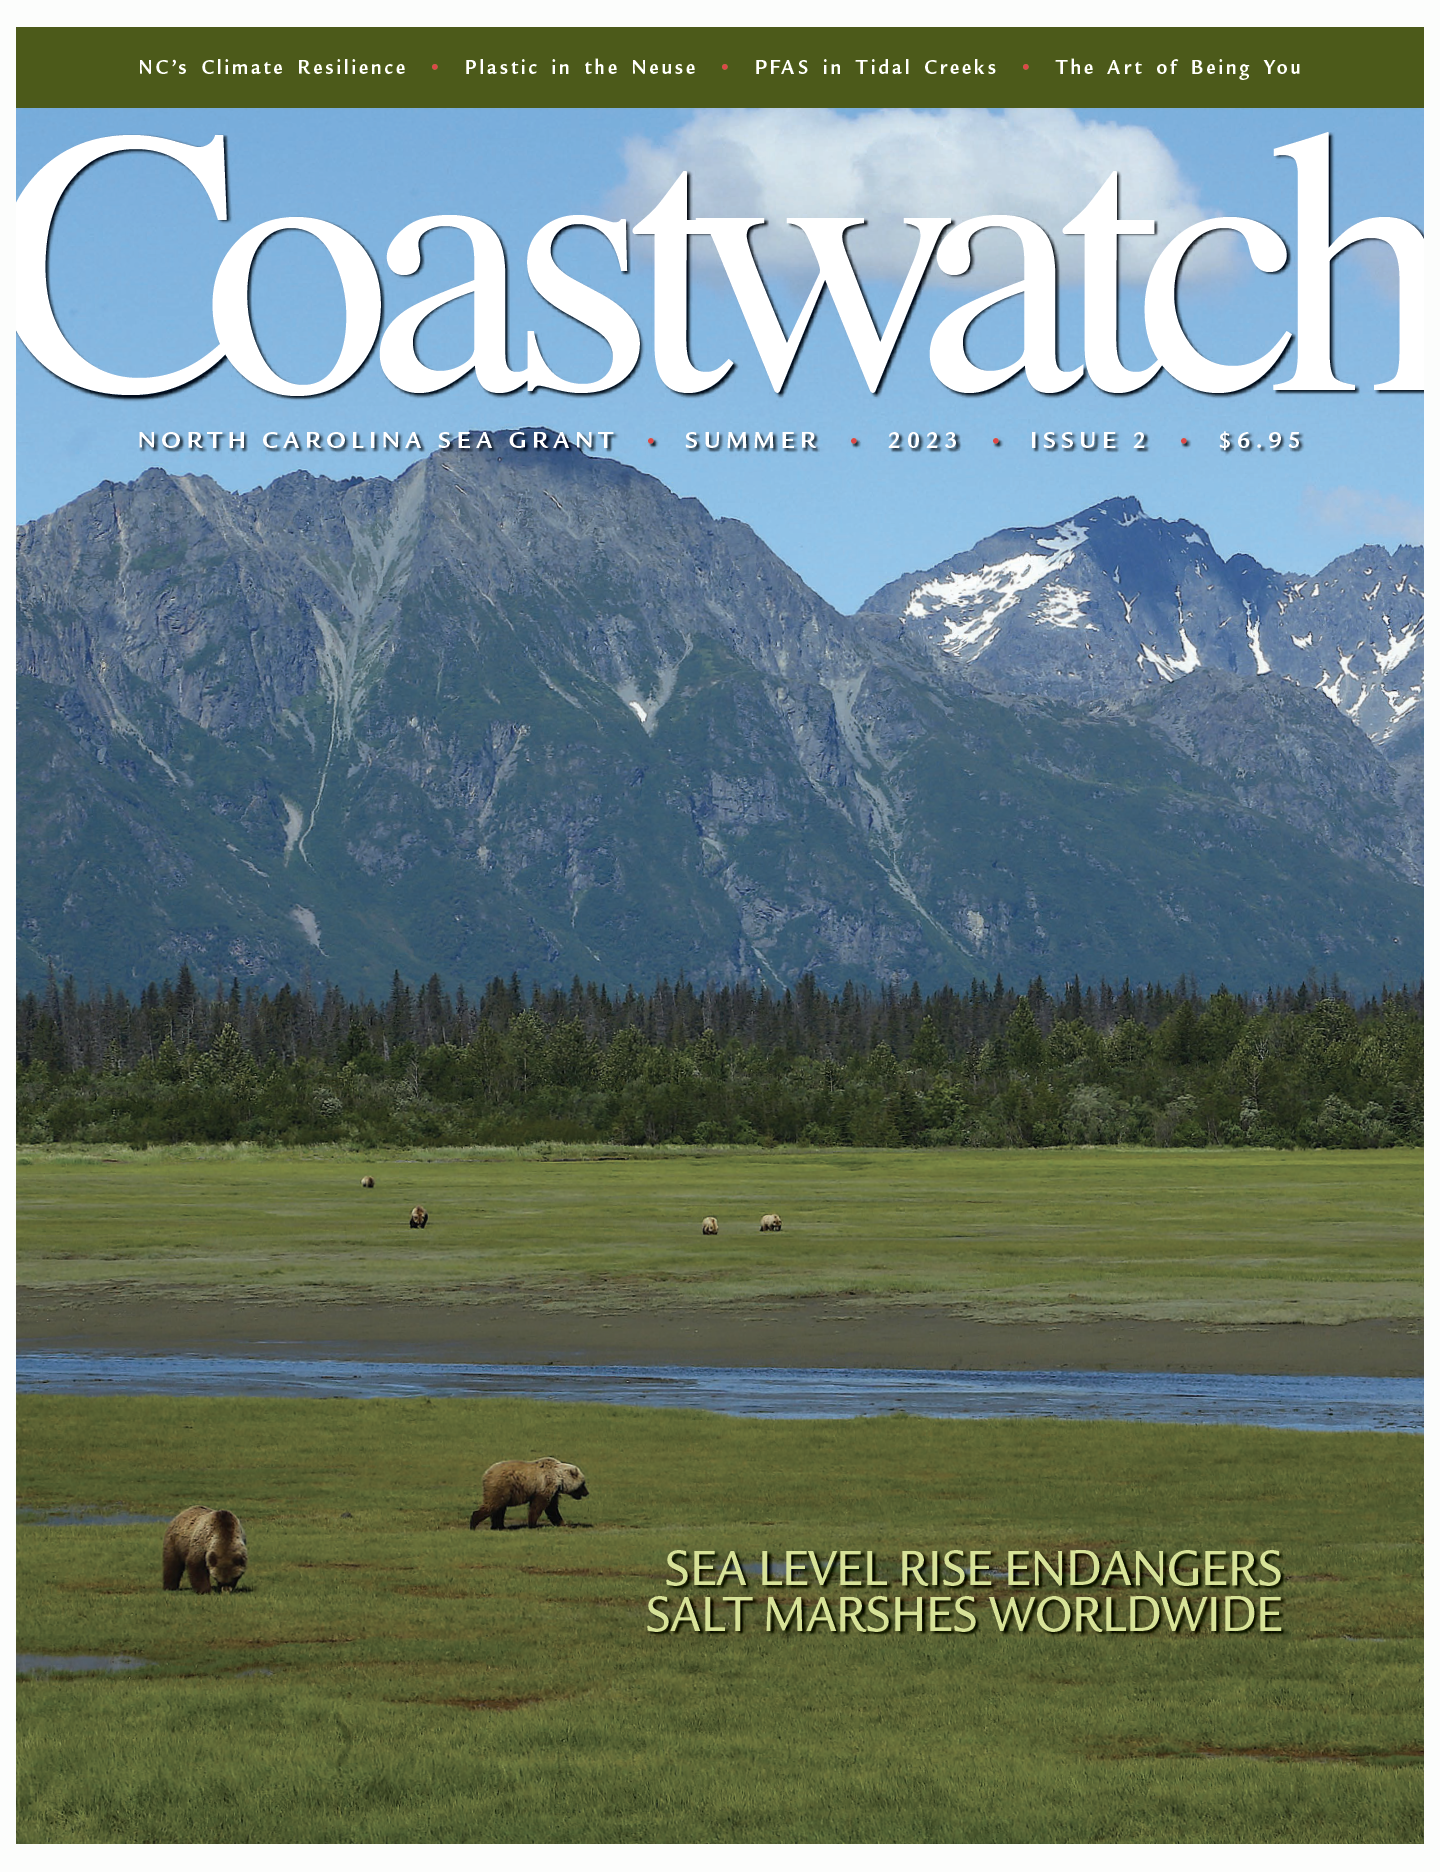 image: SUMMER 2023 cover of Coastwatch.